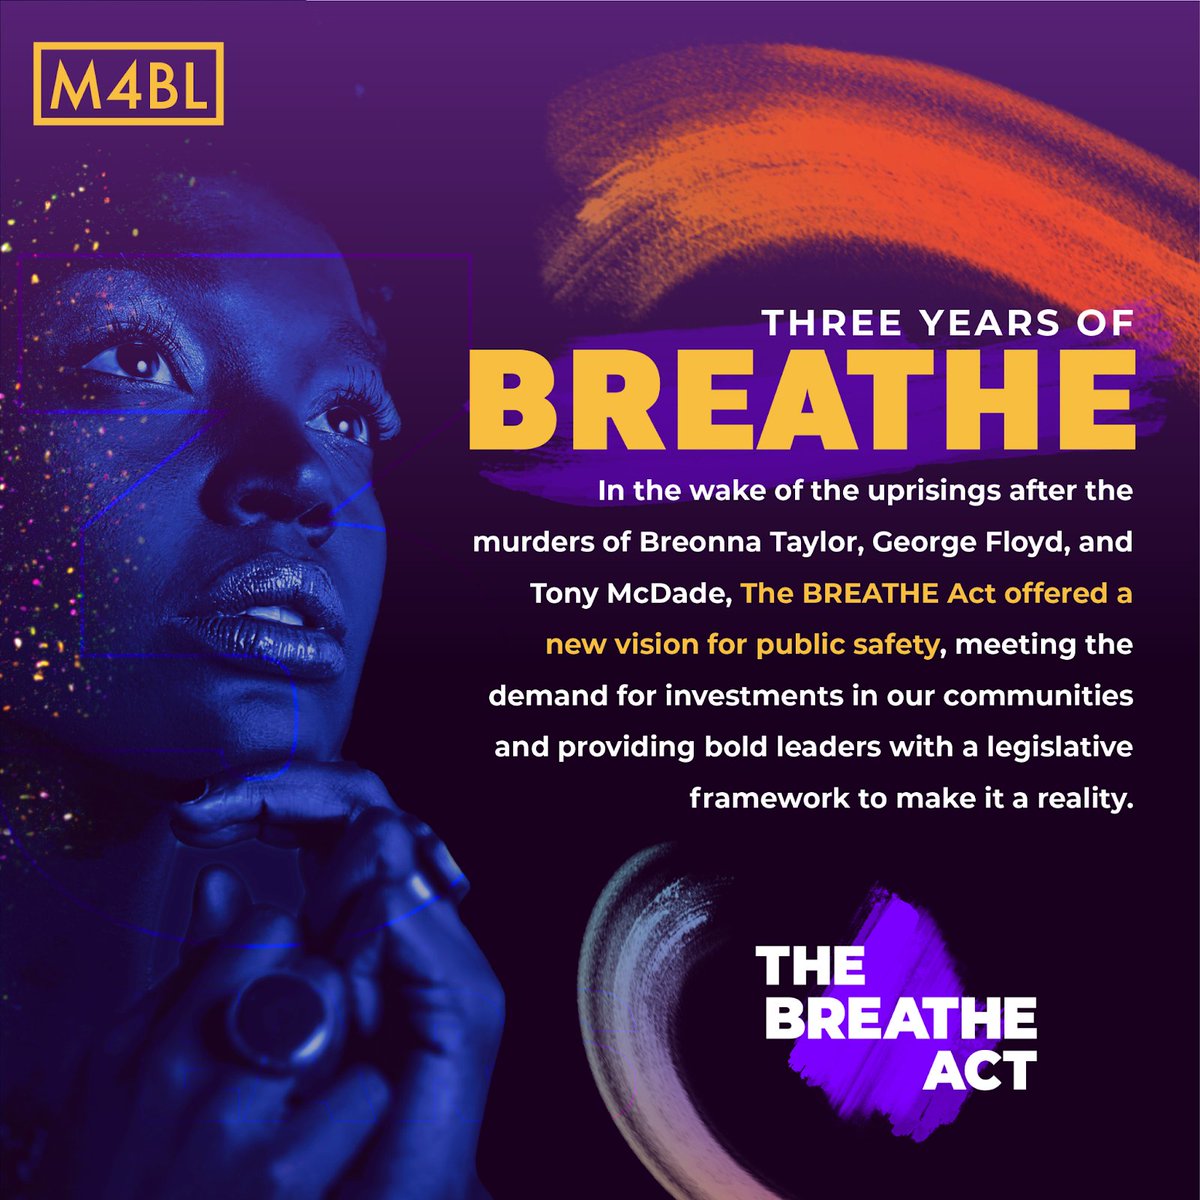 The BREATHE Act has laid the groundwork for us to get closer to abolition! Next: It's time to divest from the police forces that are killing us, and invest in the resources that actually work to keep all of us safe.